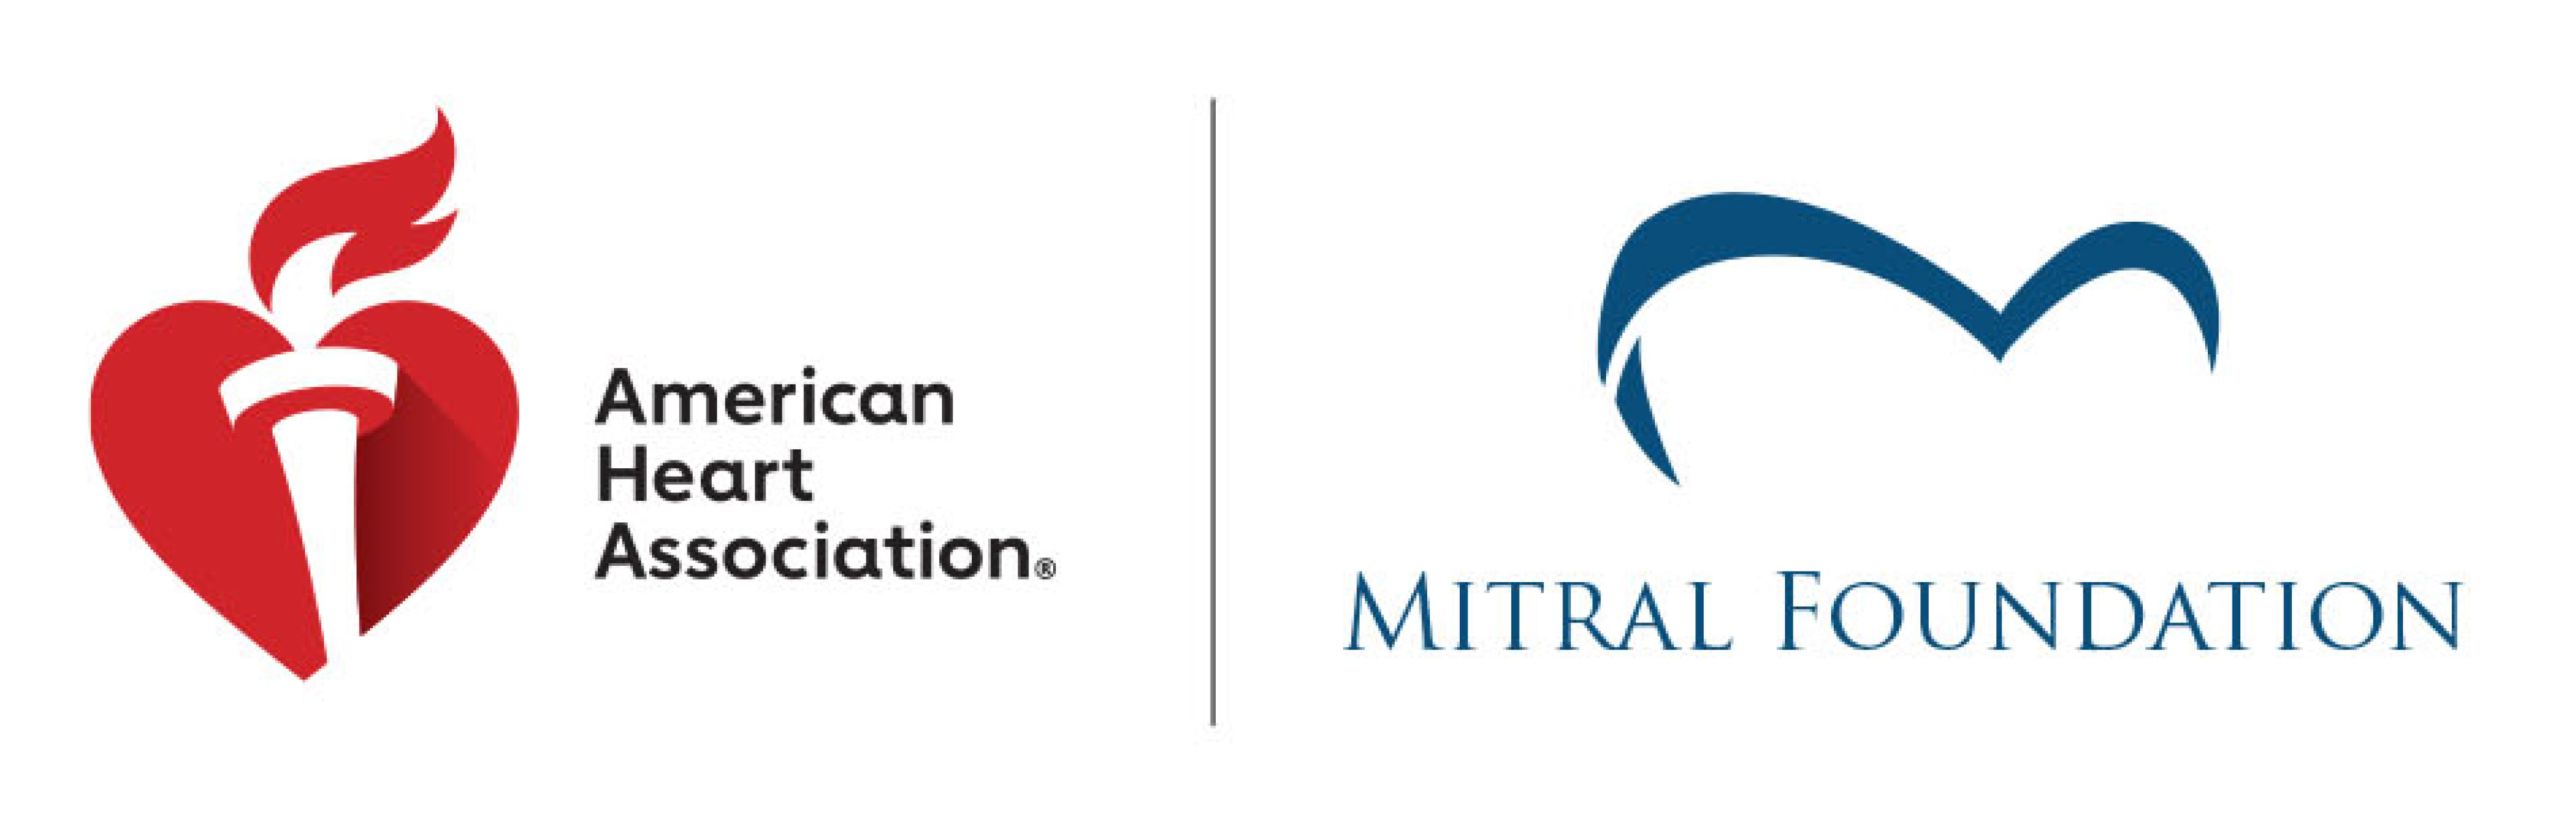 American Heart Association and Mitral Foundation co-brand logo